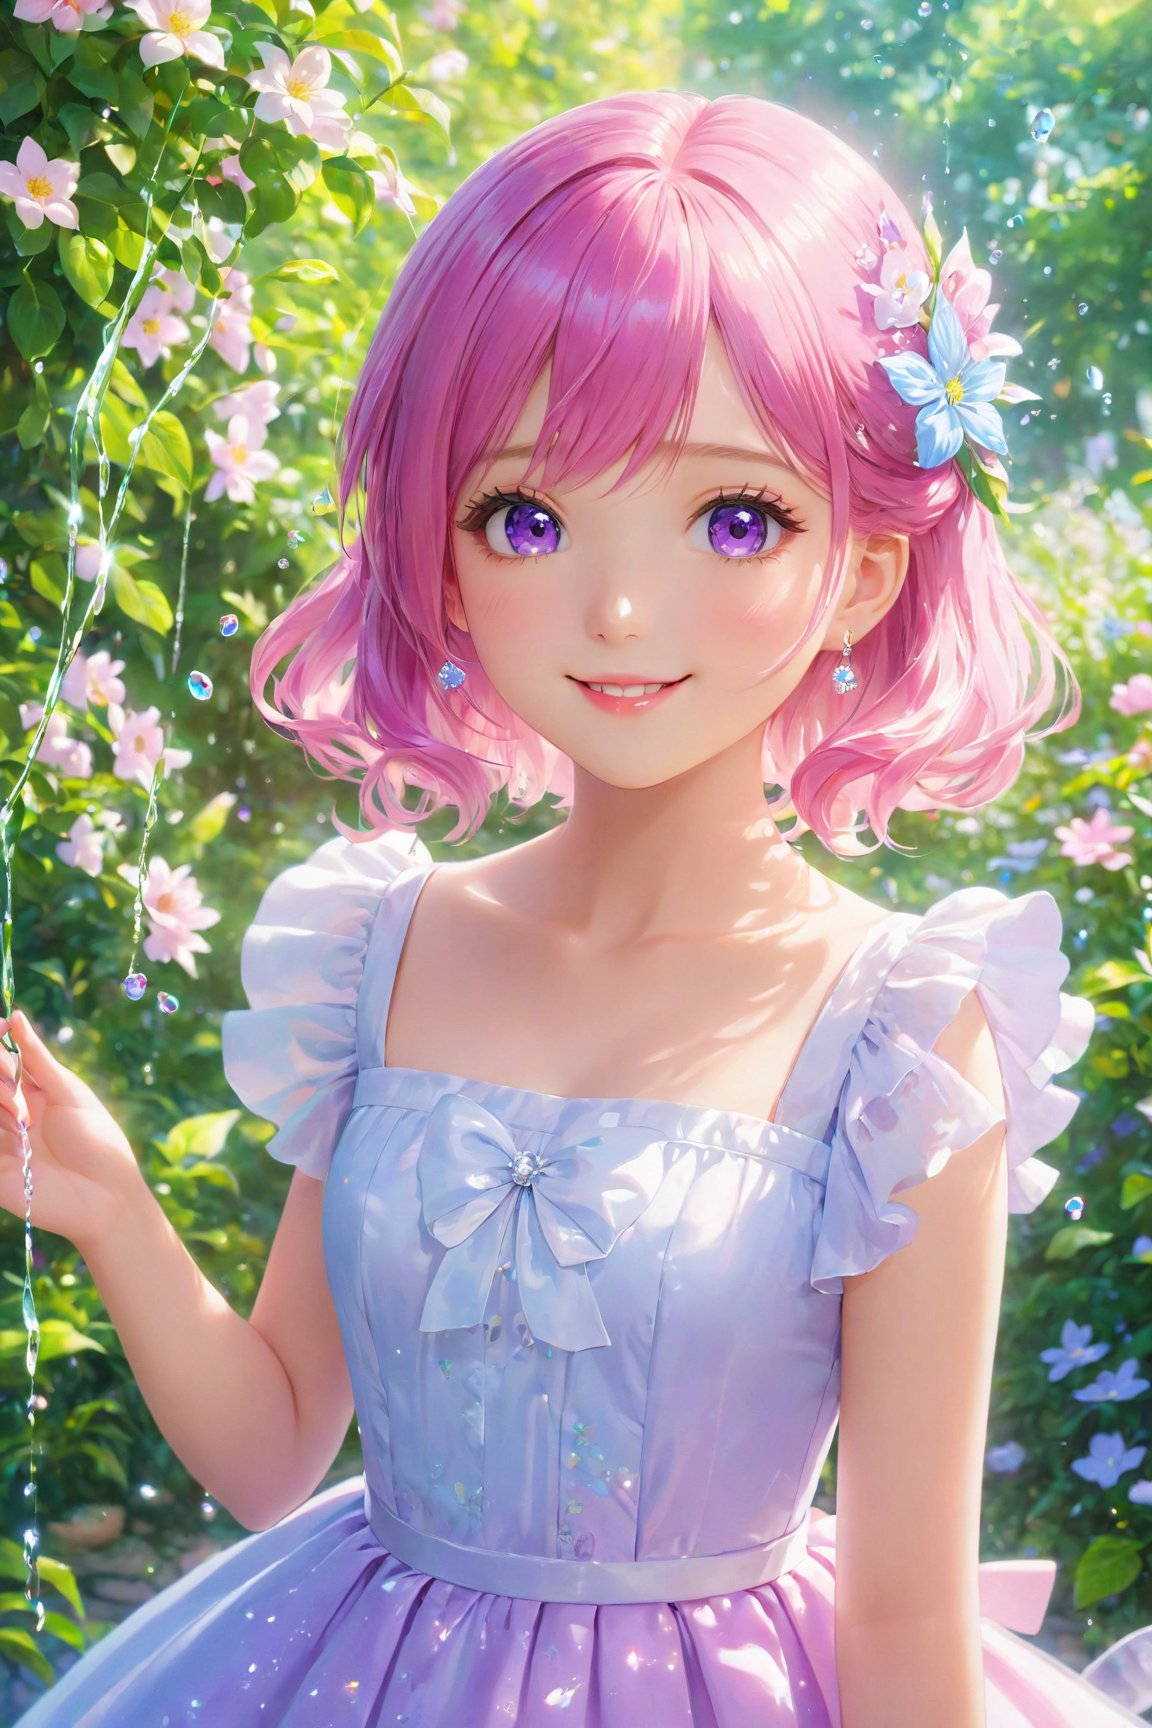 (best quality,4k,8k,highres,masterpiece:1.2),ultra-detailed,(realistic,photorealistic,photo-realistic:1.37),cute,sexy,anime,girl,purple eyes,pink hair,colorful,pastel colors,vibrant,painting-like,soft lighting,peaceful garden,blooming flowers,sparkling water,natural beauty,lively atmosphere,detailed facial features,shiny lip gloss,glossy hair texture,playful expression,feminine charm,flowing dress,charming pose,innocent smile,adorable accessories,sunlit background,tranquility,enchanting ambiance,harmonious composition,storybook-like scenery,fantasy elements,magical touch.